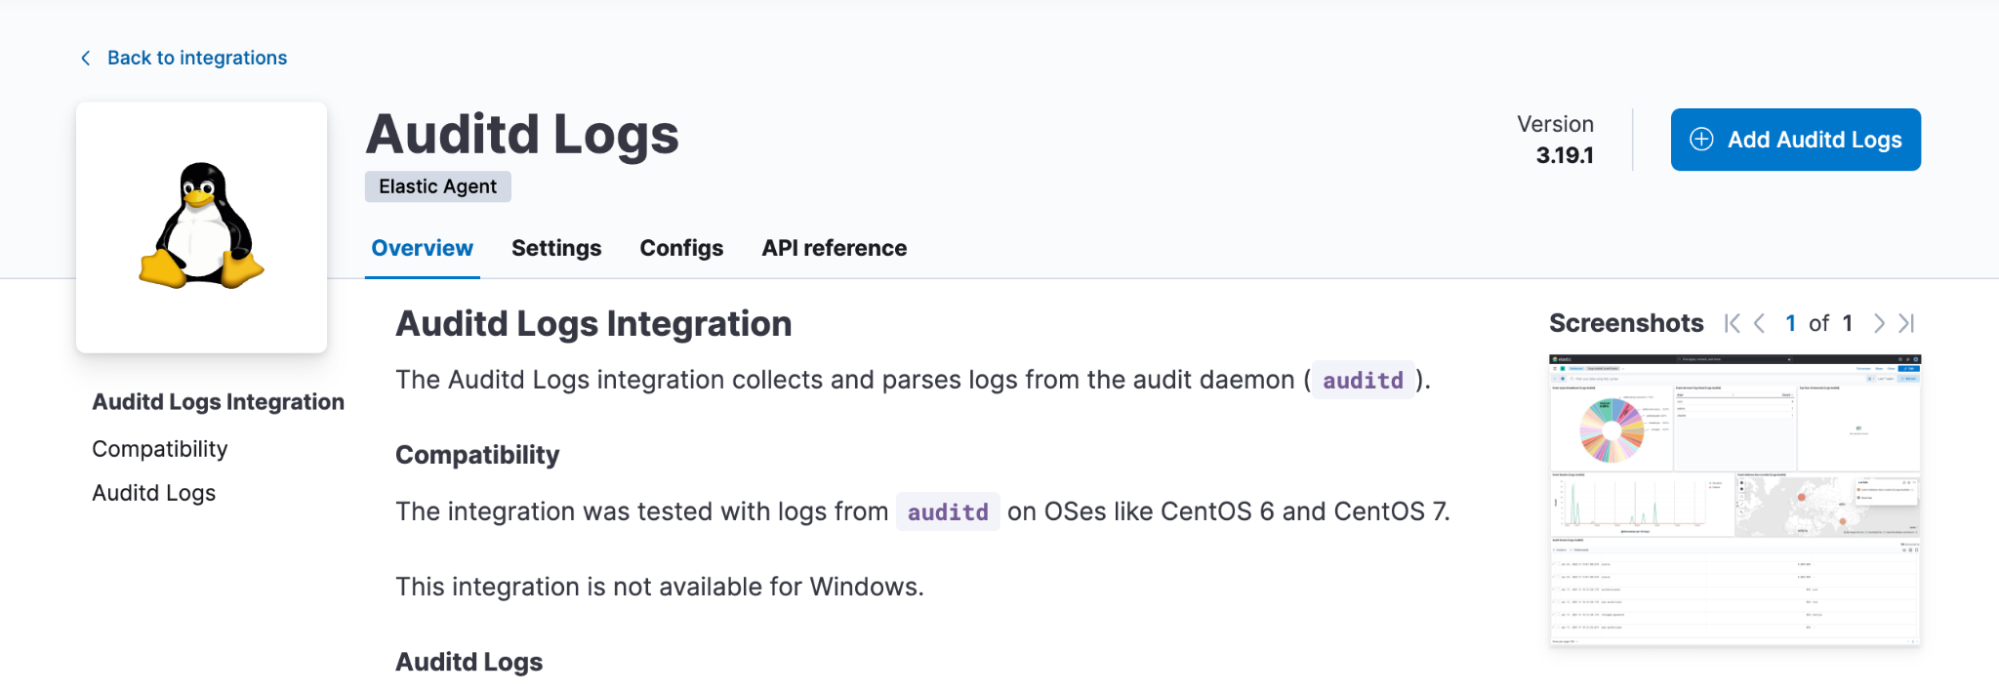 Auditd Logs integration page in Elastic